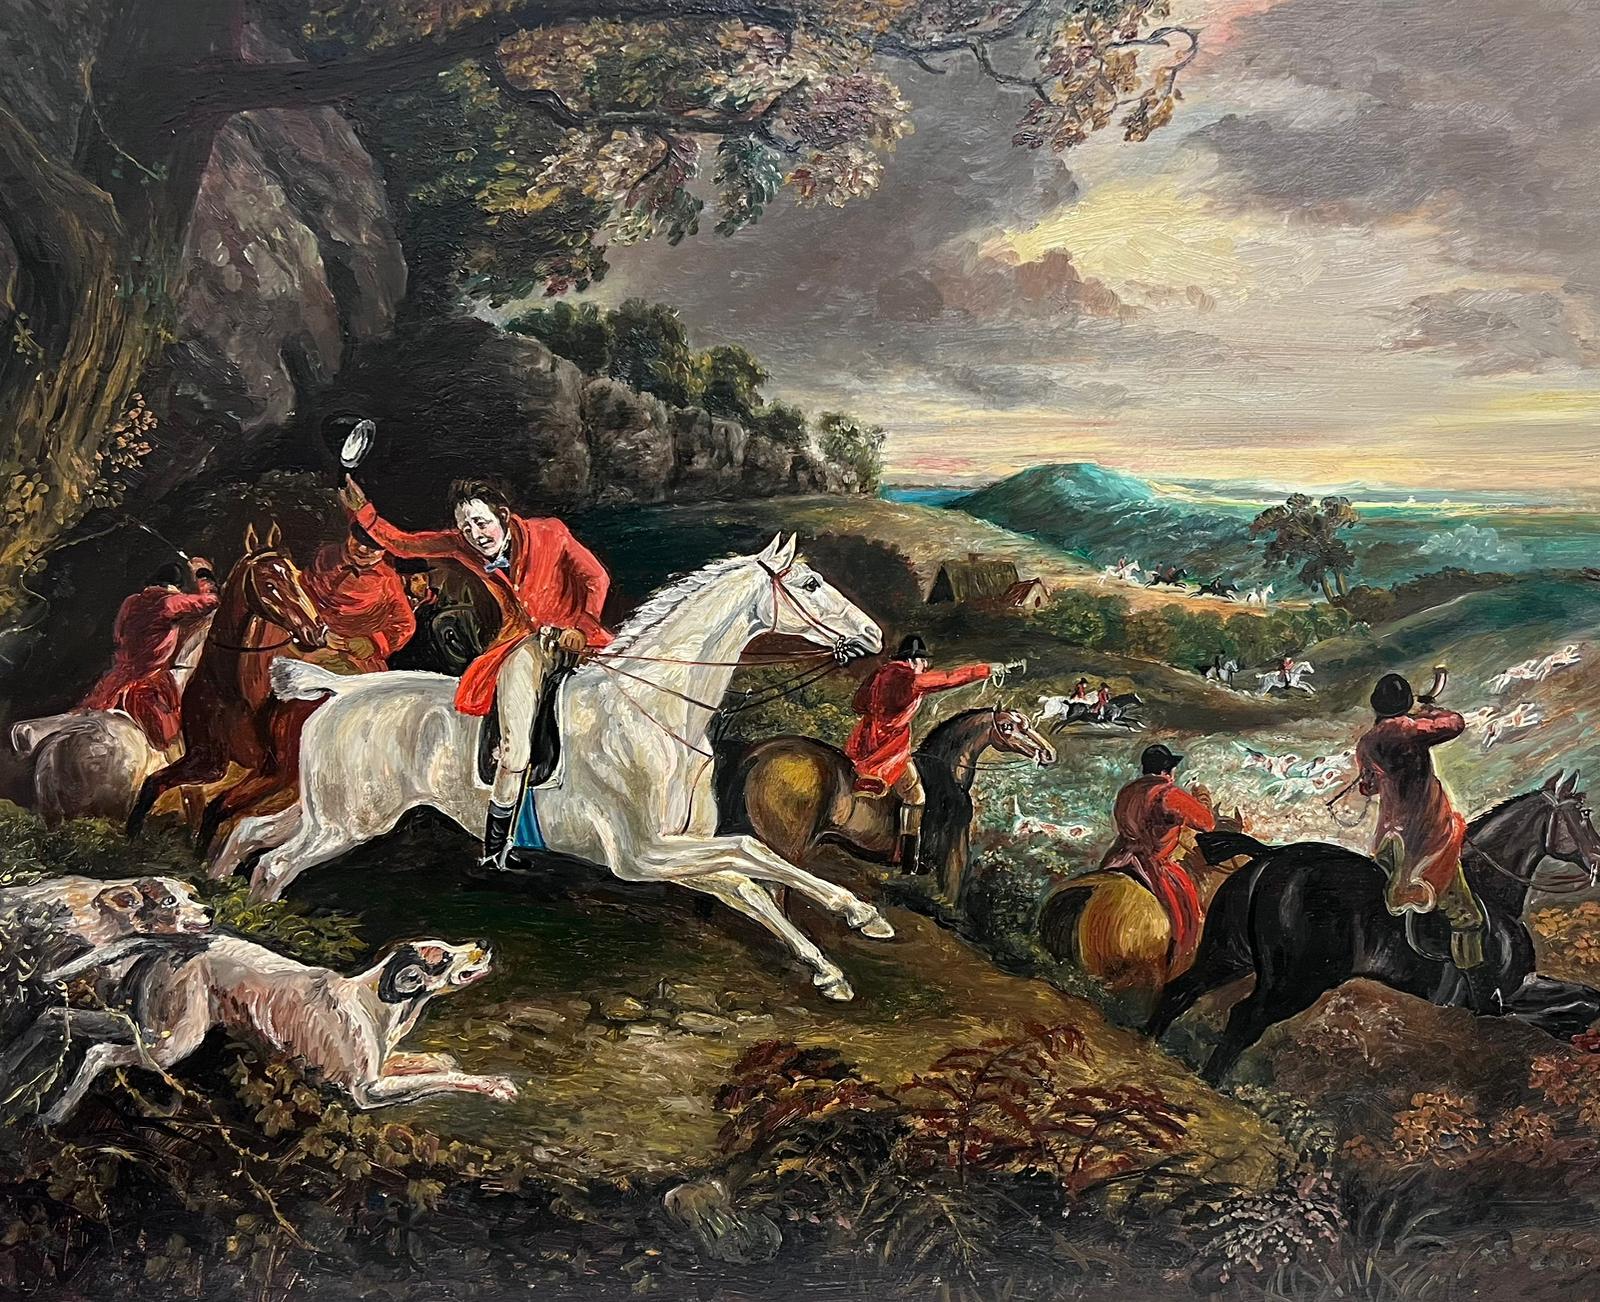 Michael Constable (20th Century British School) Figurative Painting - Classic English Fox Hunting Horses Riders & Hounds in Landscape, British Oil 